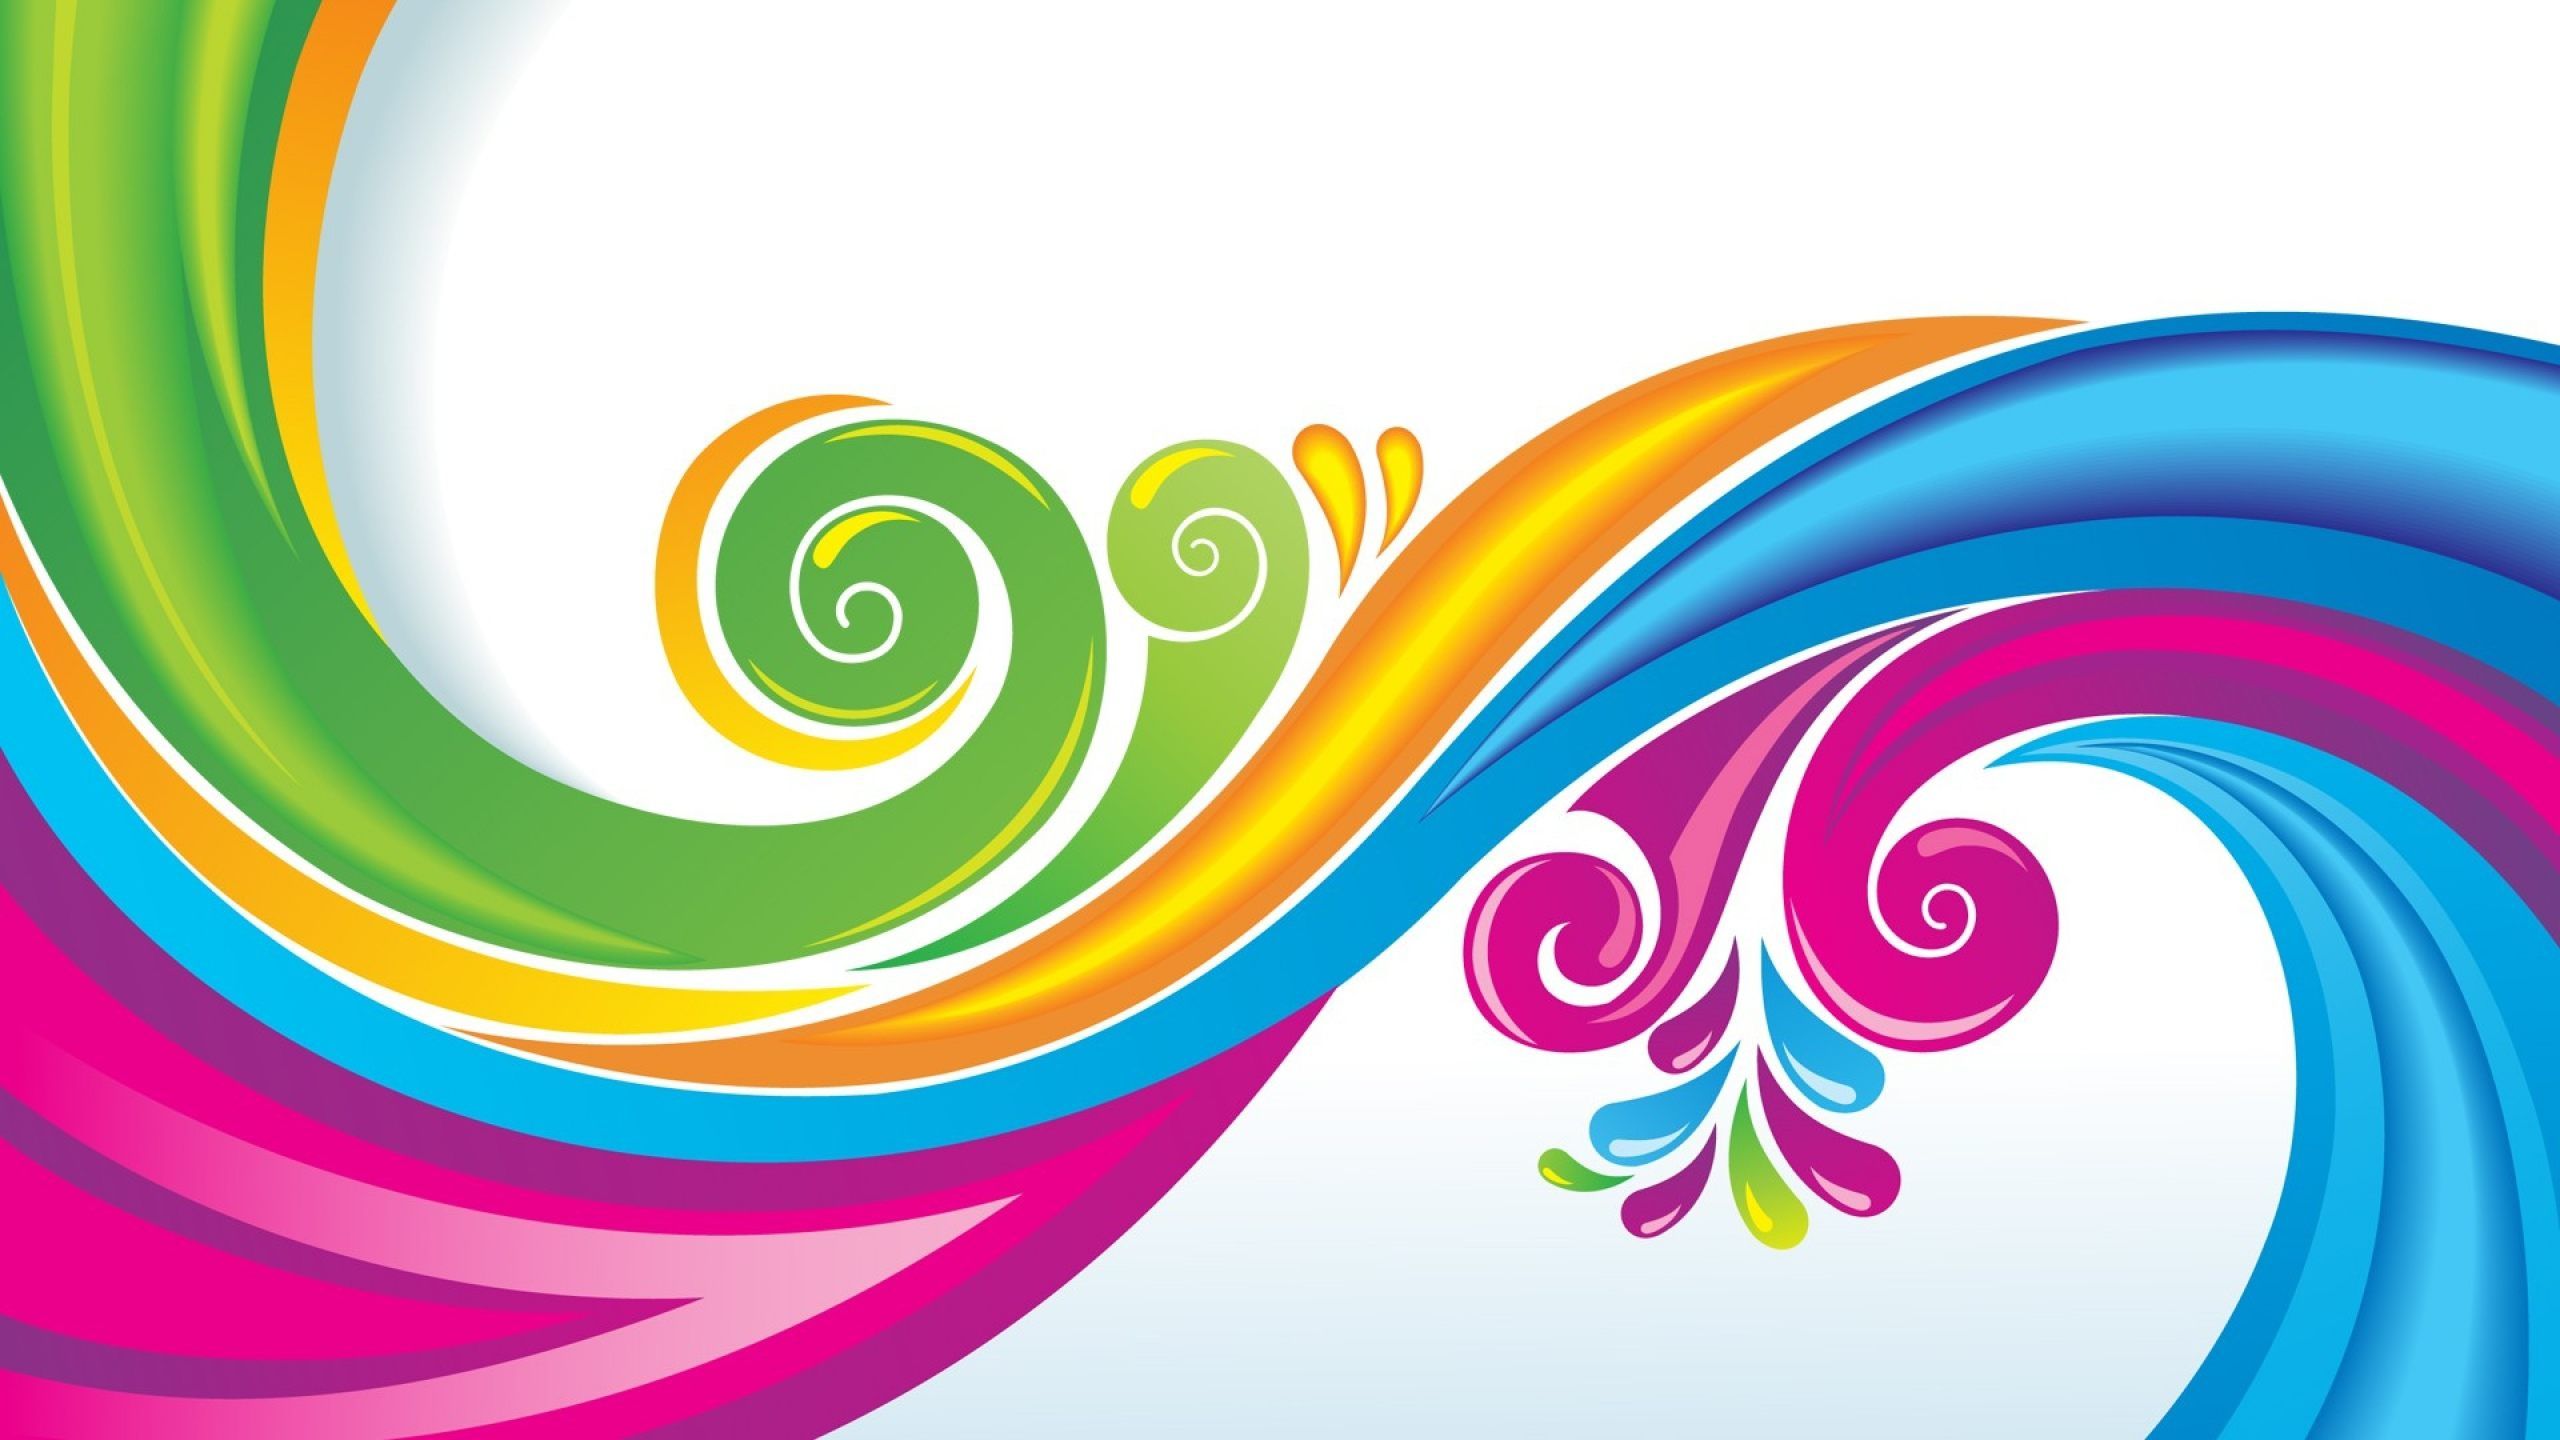 Free download Swirl Vector Art Wallpaper HD Download Of Colorful